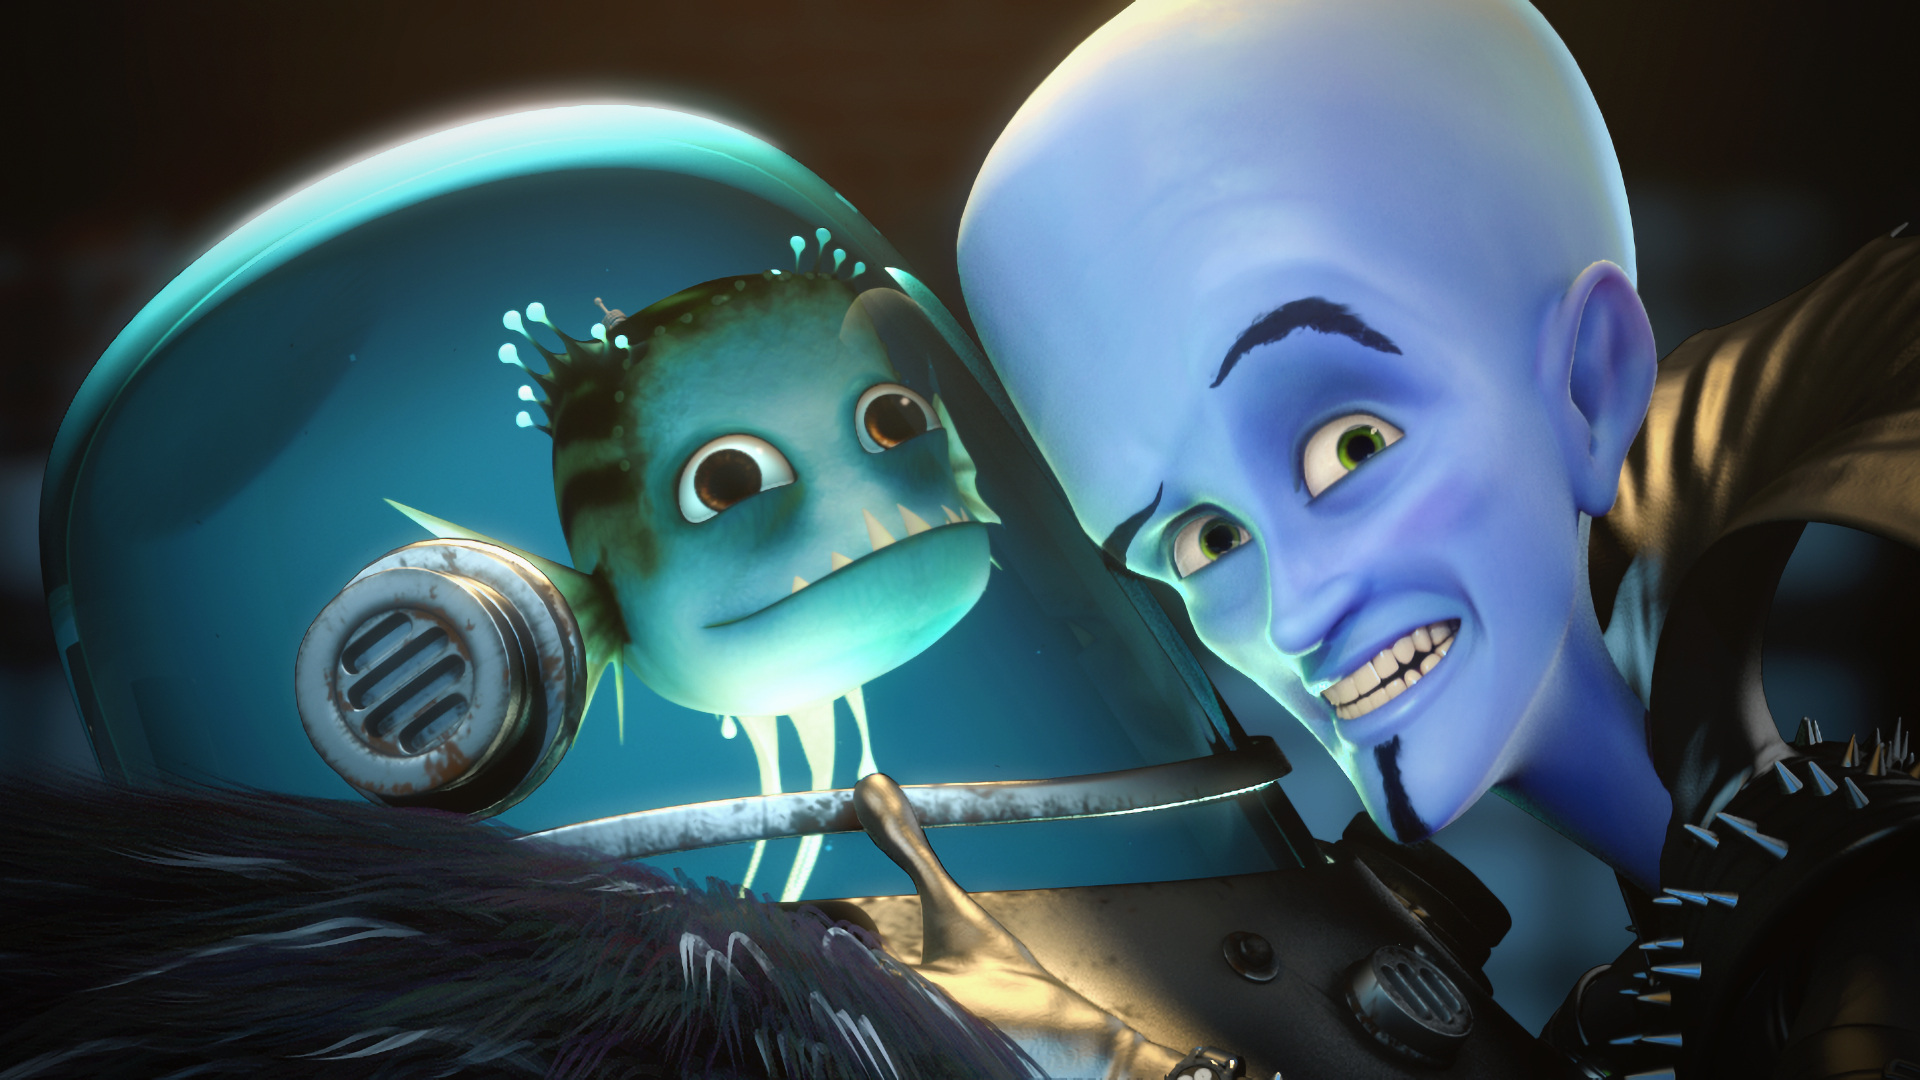 Megamind In-Game Cinematic Image Megamind and Minion.